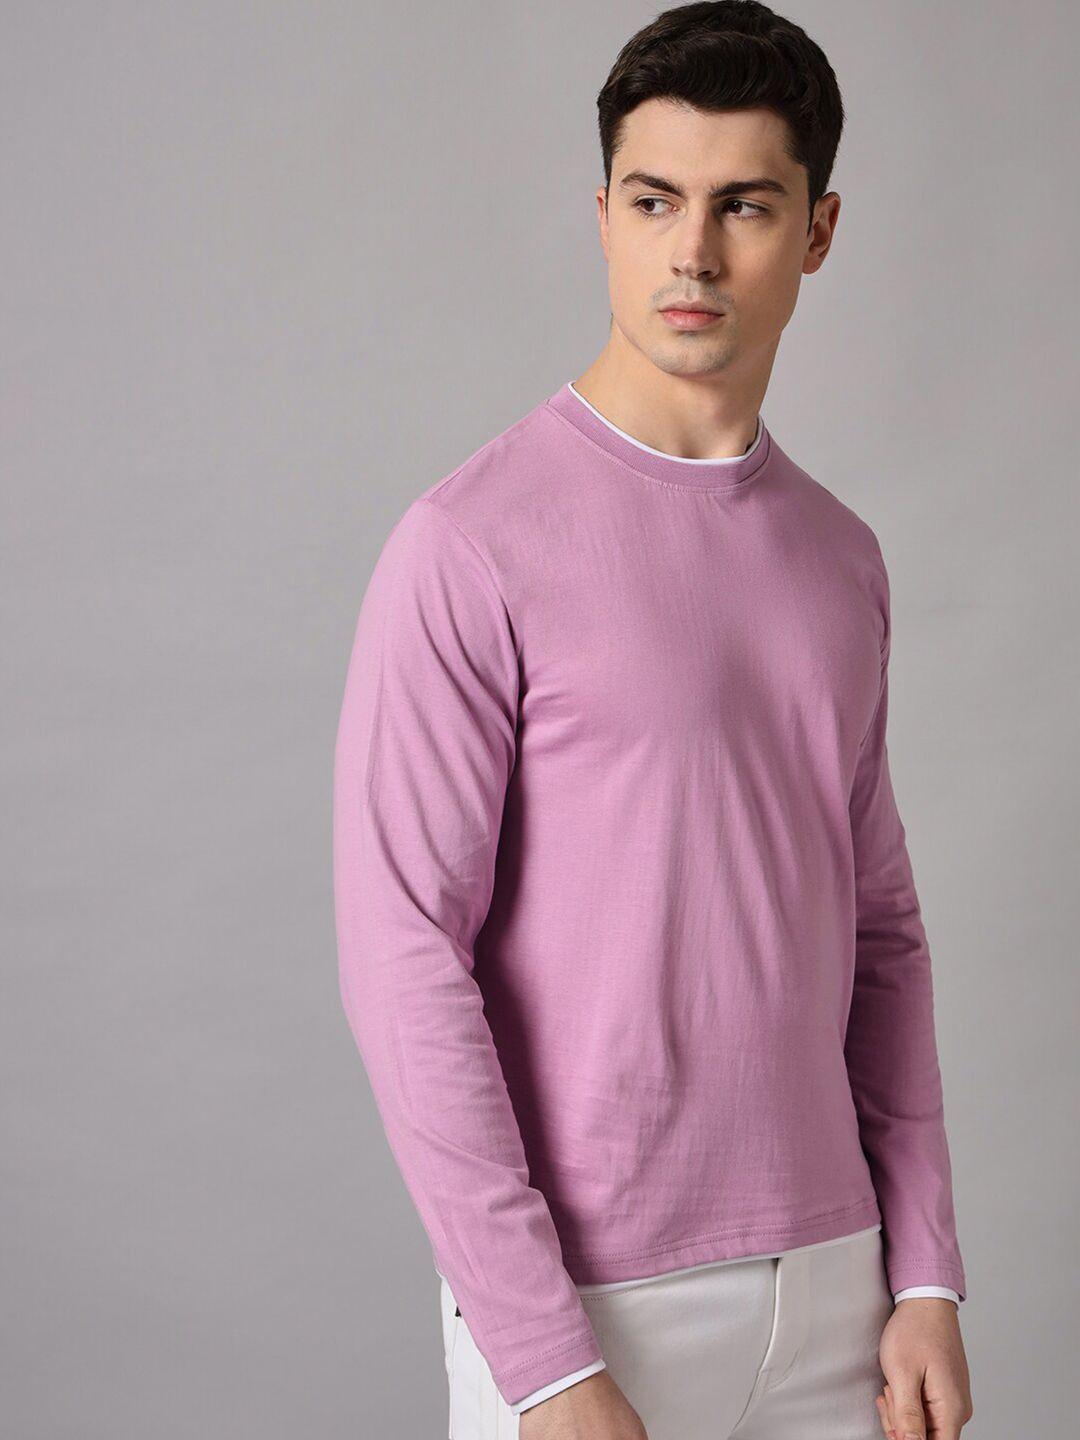 the dry state round neck long sleeve cotton t-shirt